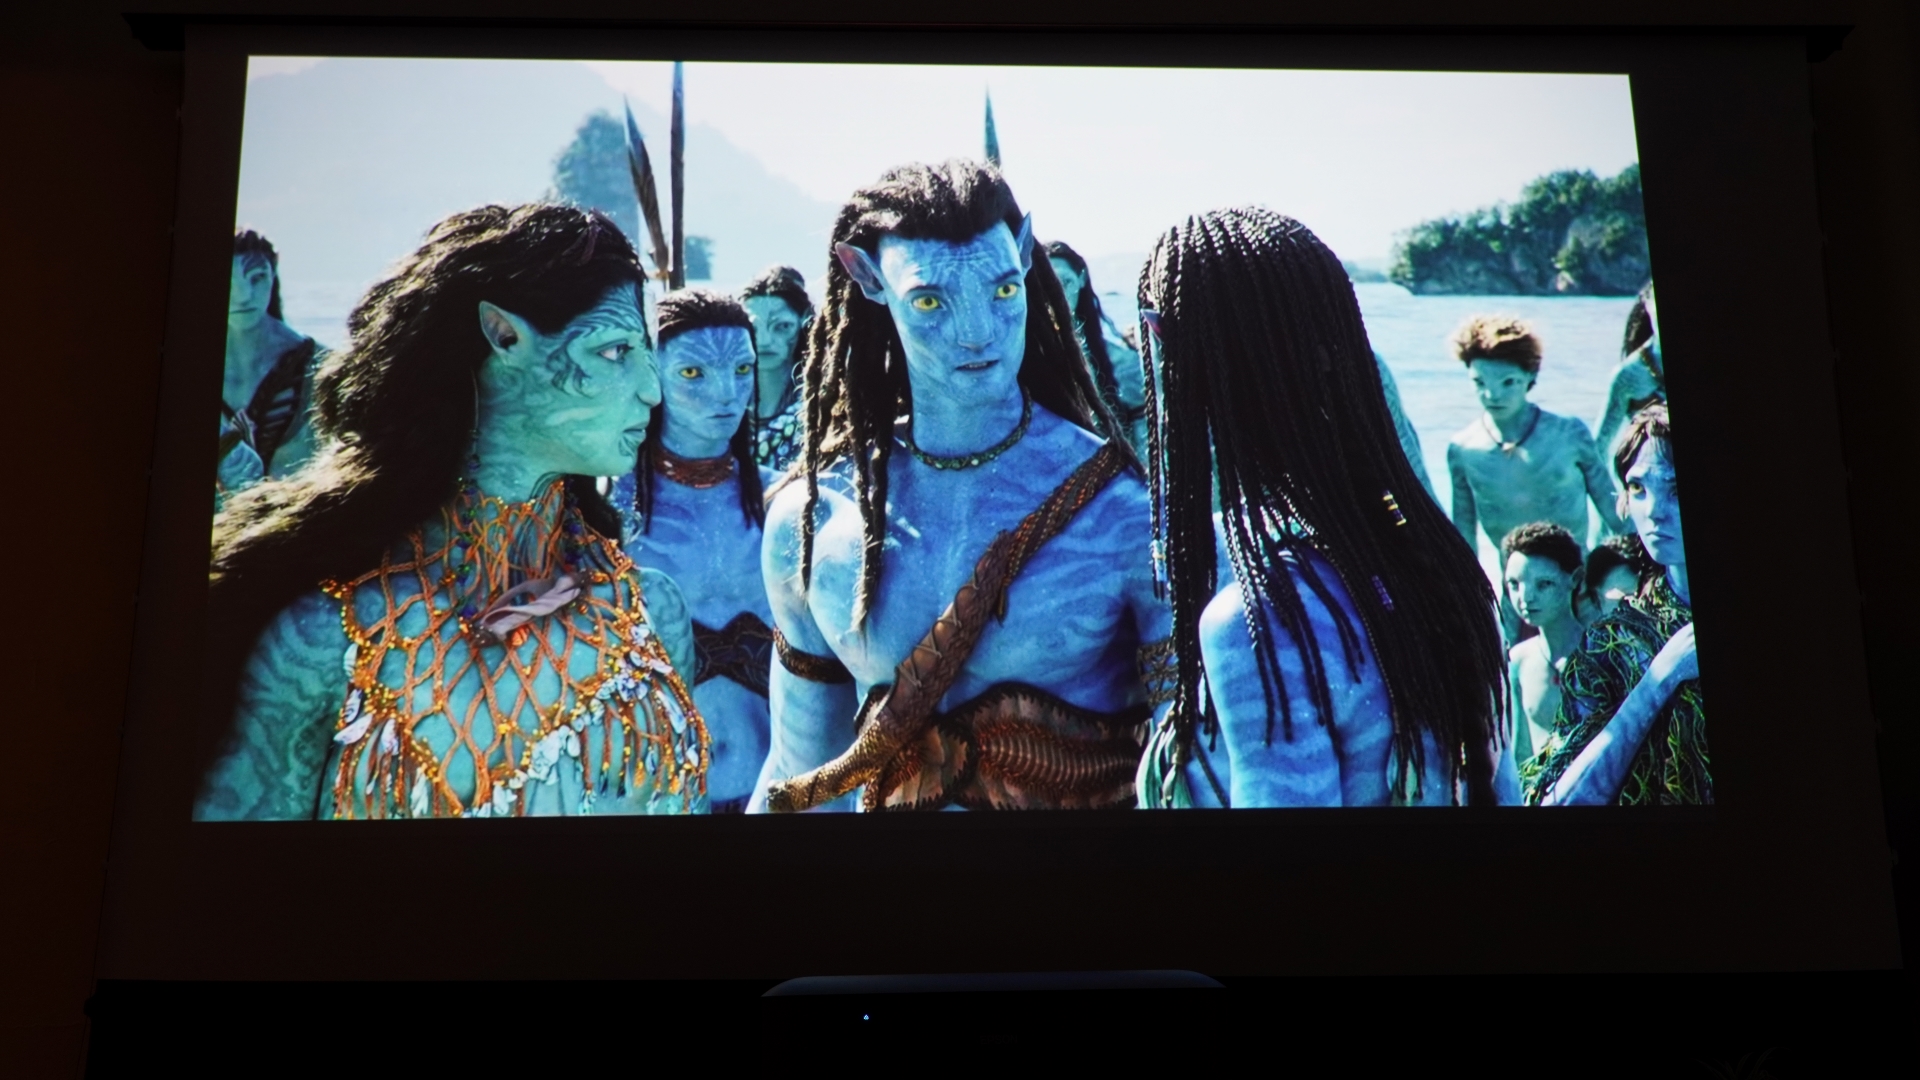 Epson LS650 showing Avatar 2 on screen